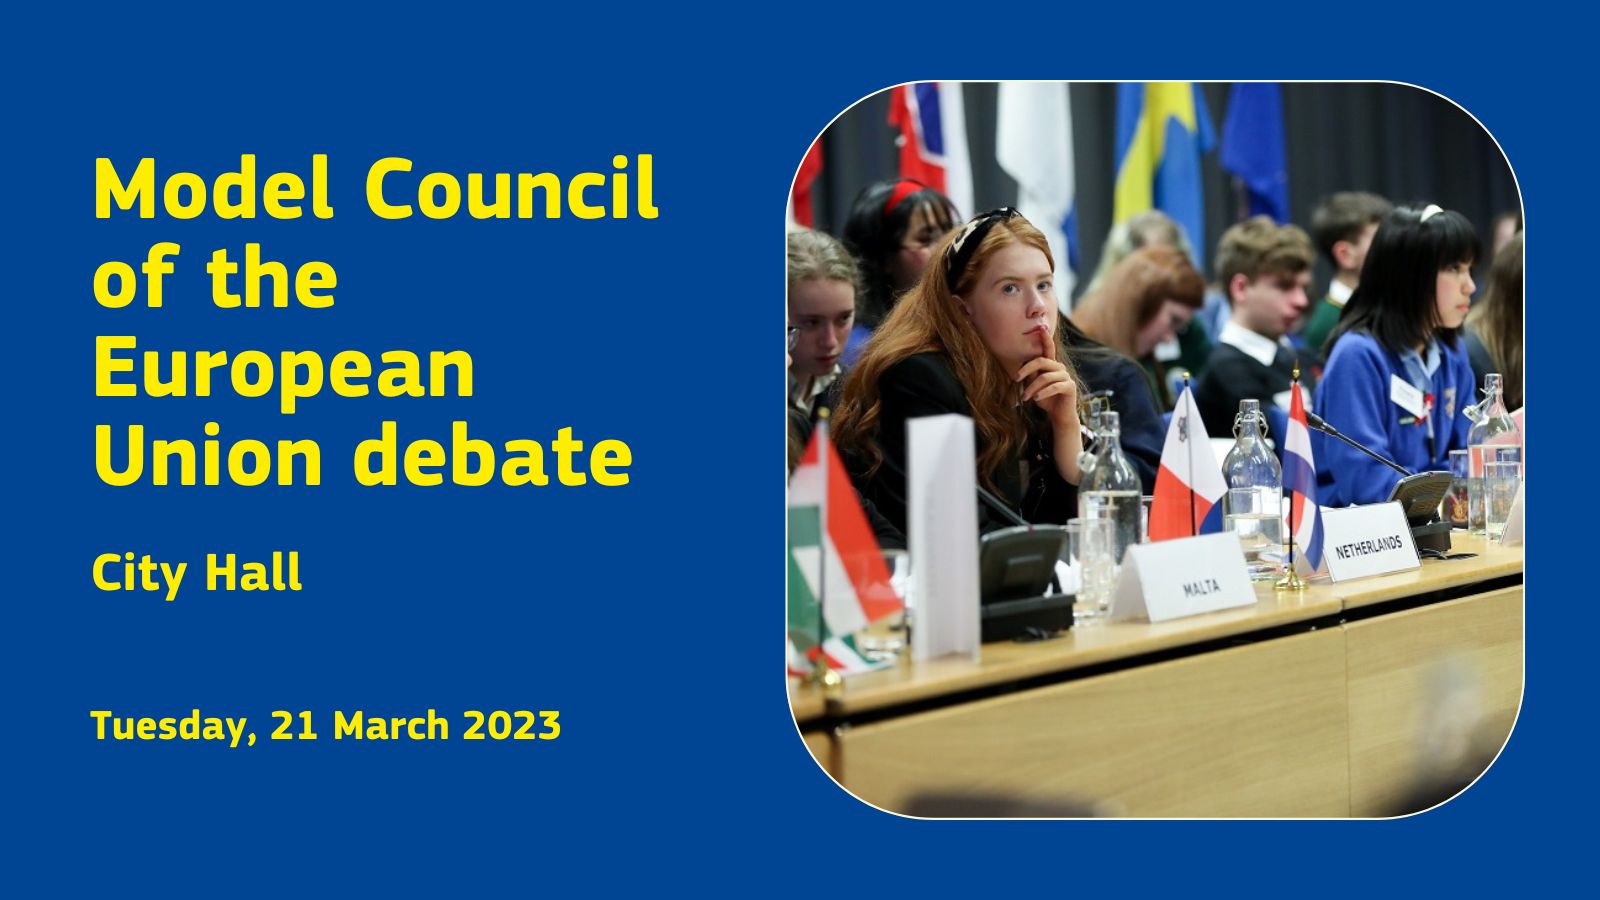 Model Council of the European Union debate for secondary schools -Image promoting the 2023 Model Council